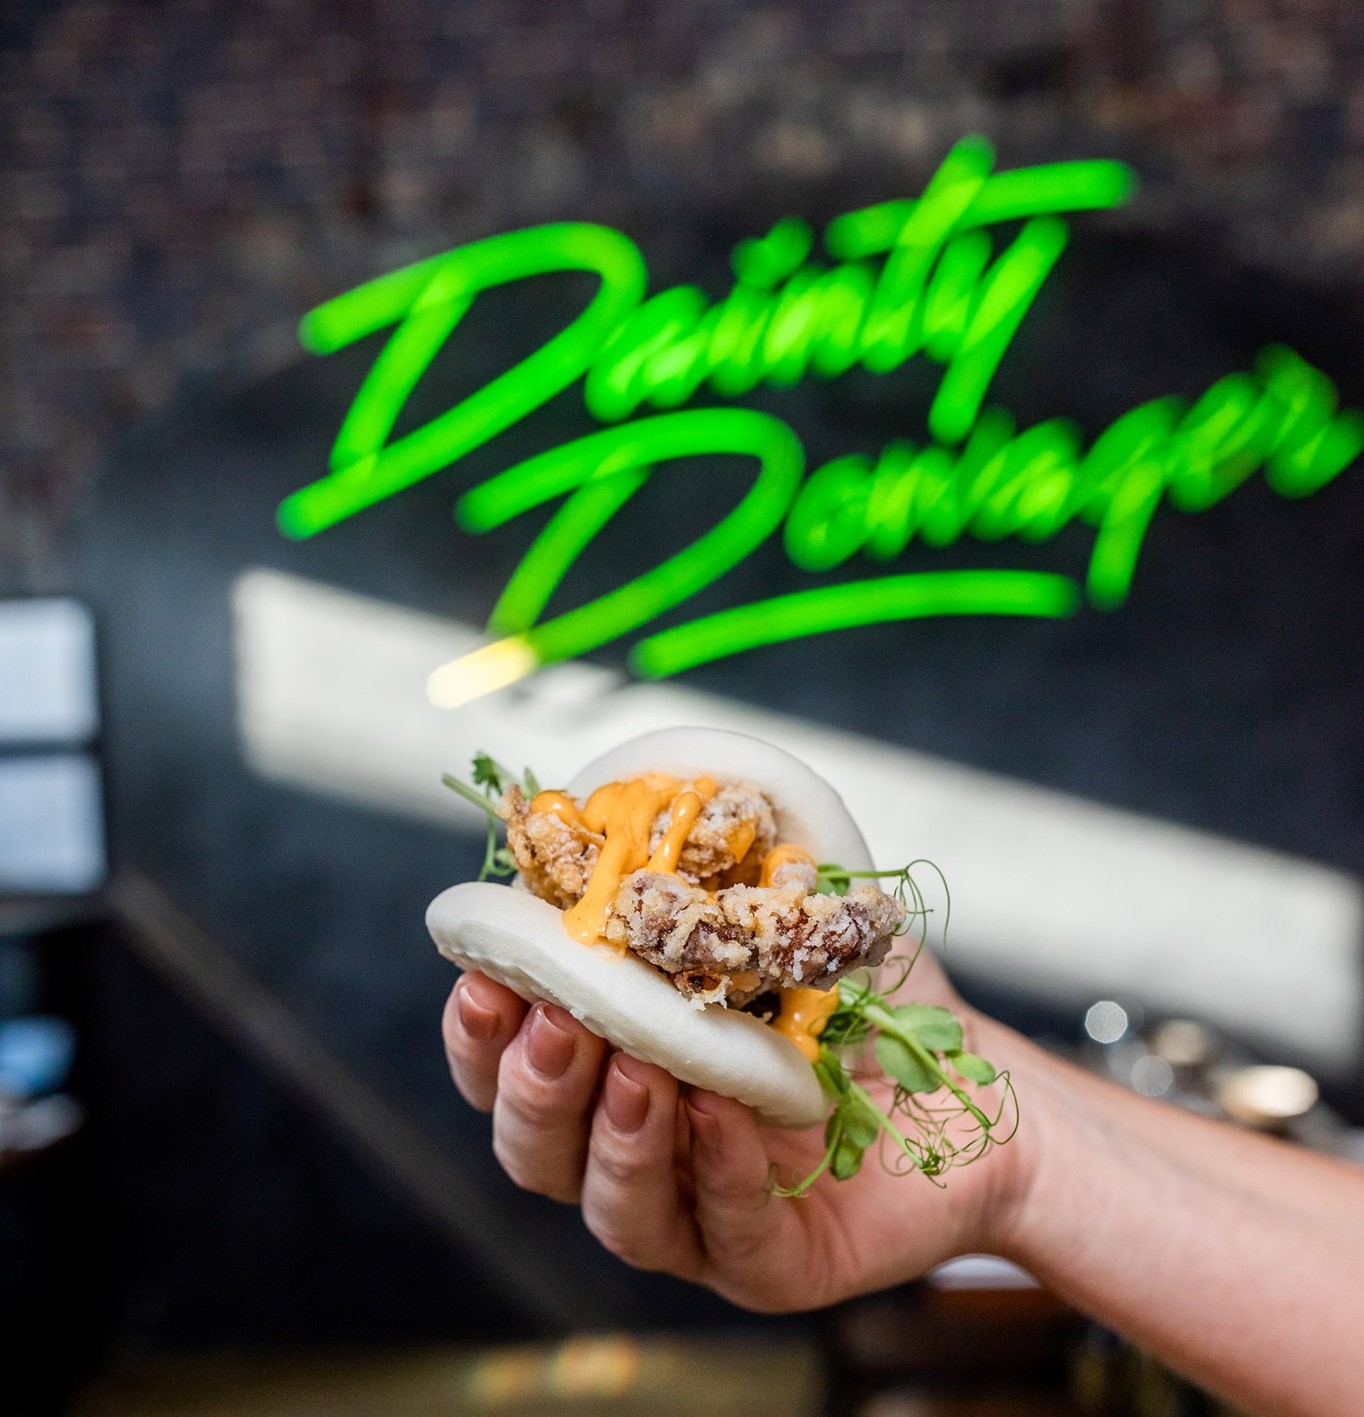 Hand holding a bao with a green neon sign in background 'Dainty Dowager'